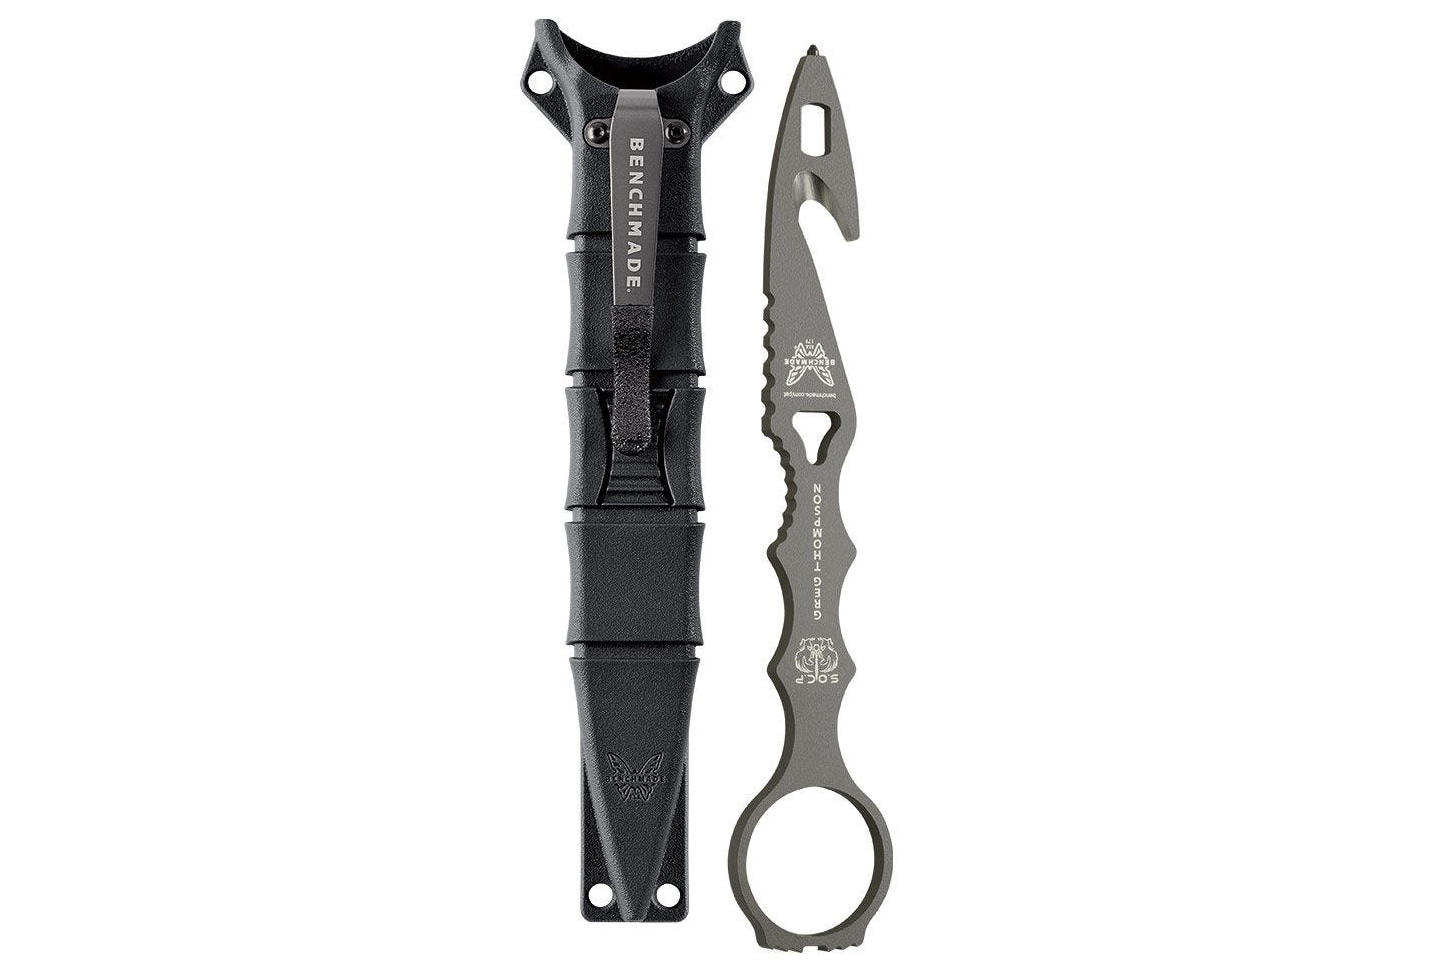 Benchmade SOCP Rescue Tool